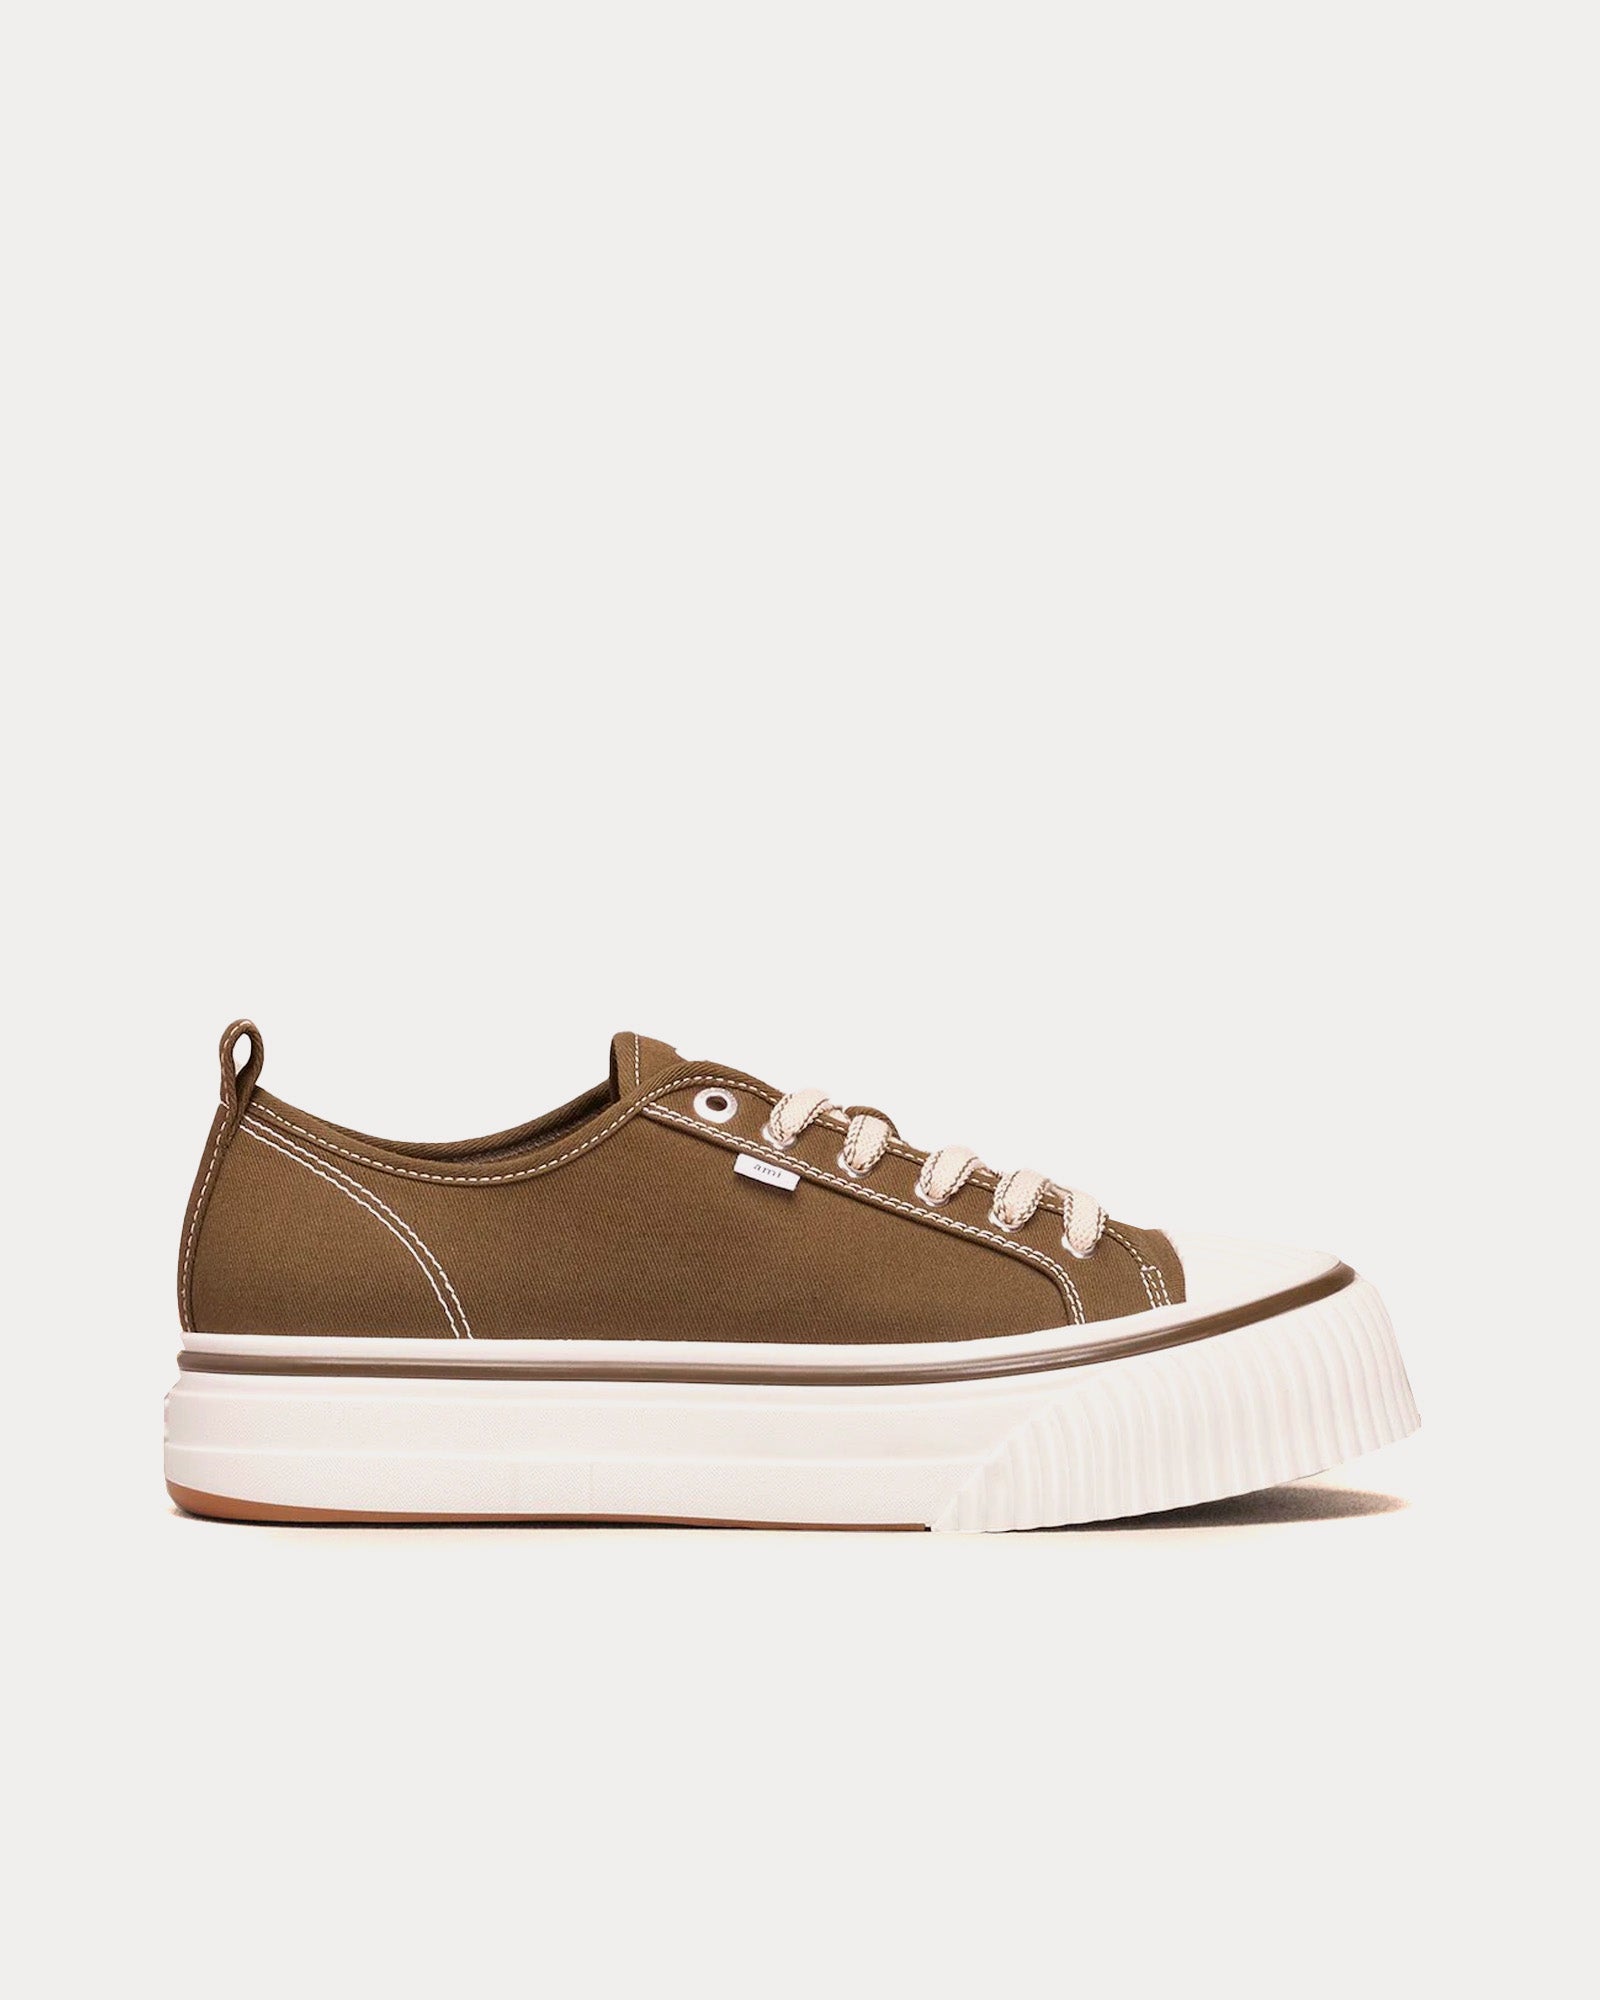 AMI - 1980 Canvas Dark Olive Green / White Low Top Sneakers